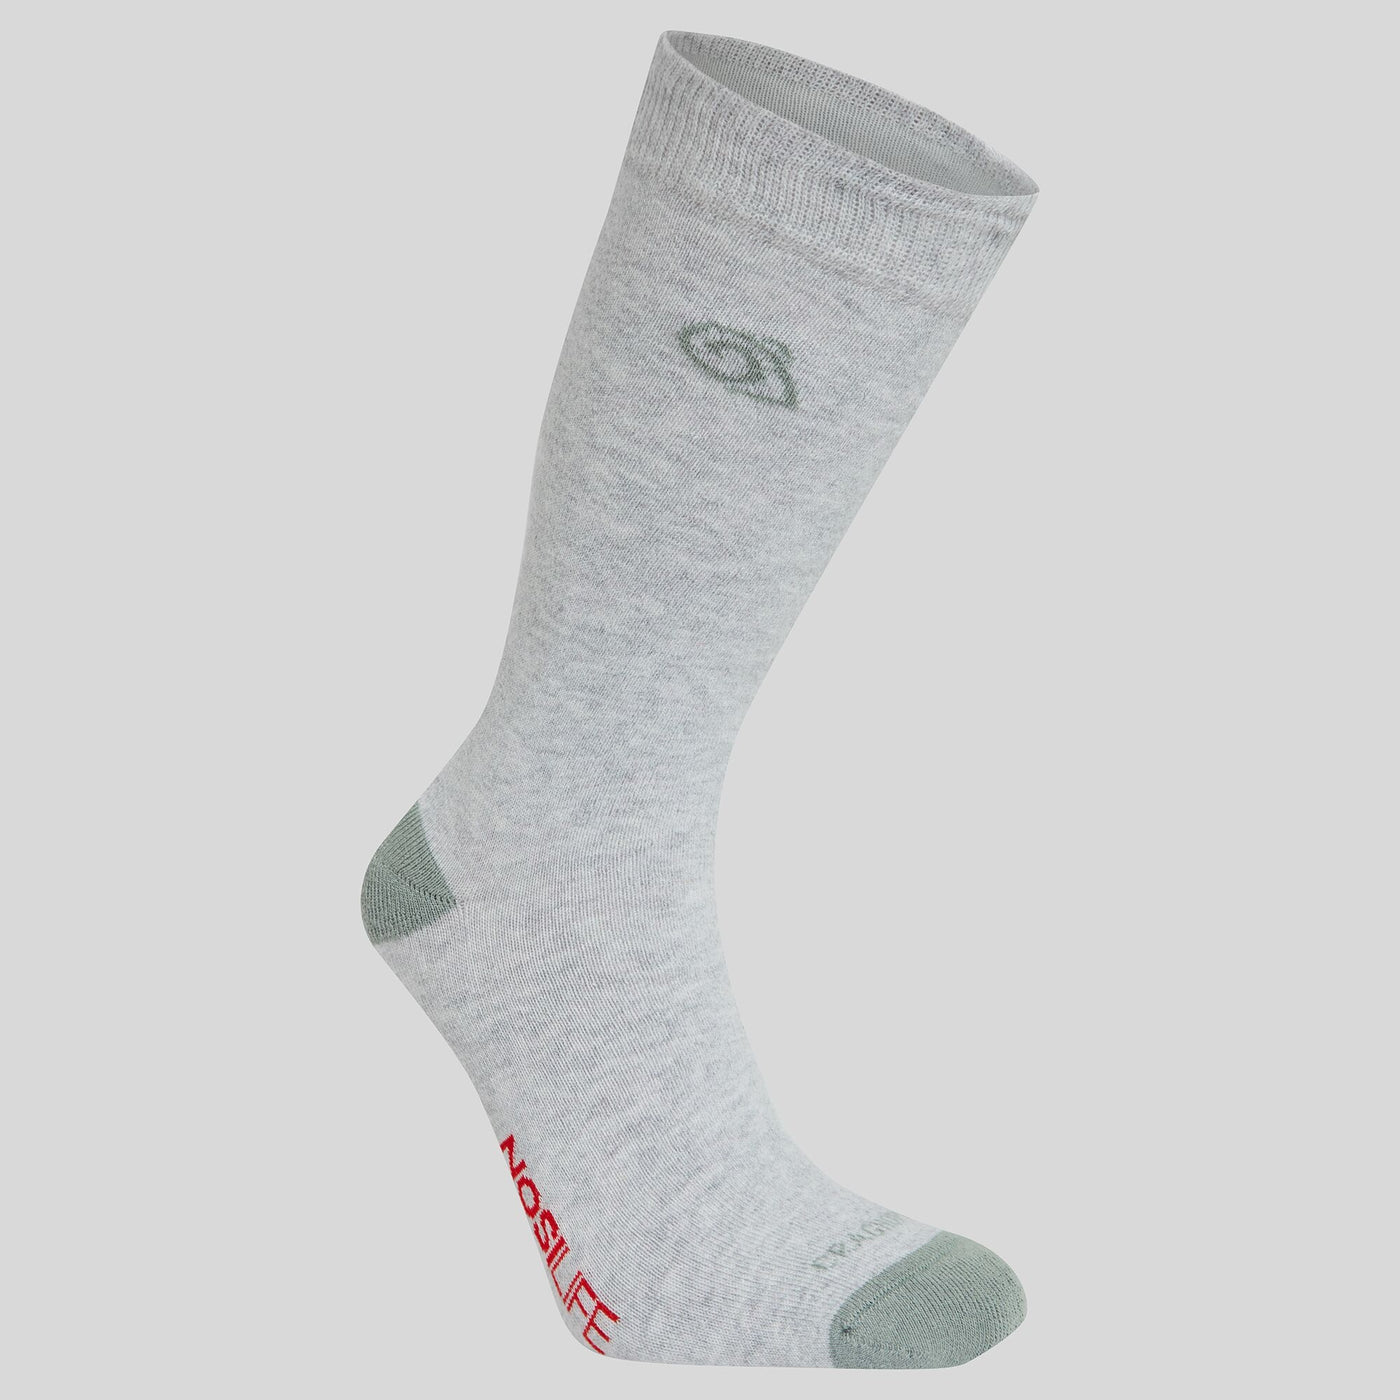 Insect repellent sock